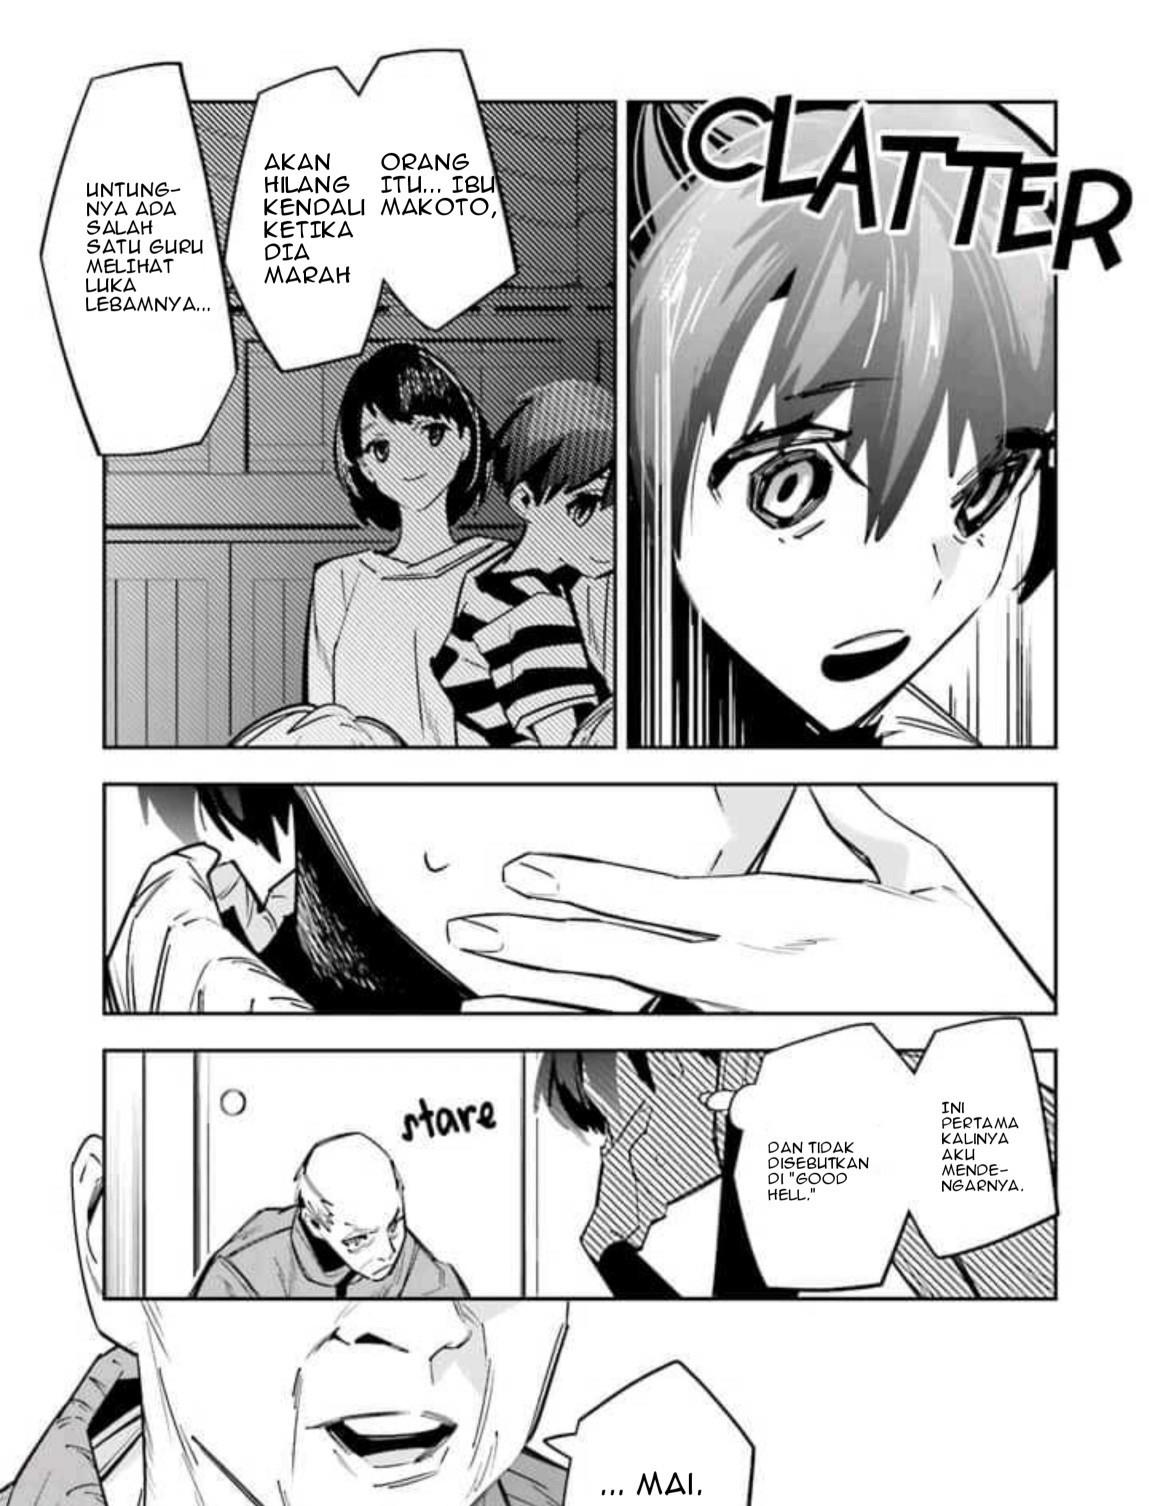 I Reincarnated as the Little Sister of a Death Game Manga’s Murder Mastermind and Failed Chapter 3